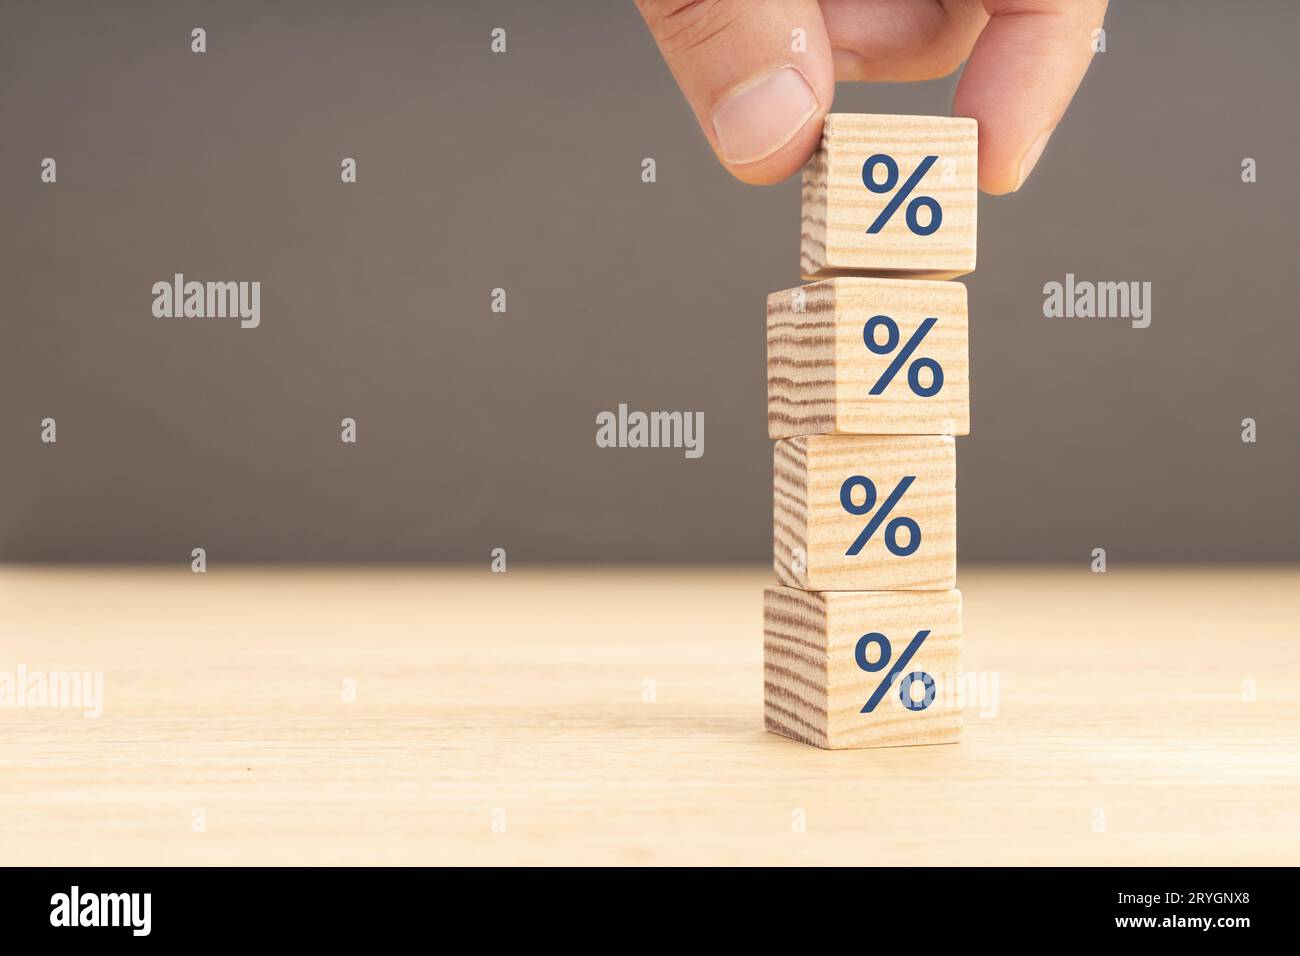 Interest rate, financial or mortgage rates concept. Hand picking a wooden block with percentage symbol icon. Copy space Stock Photo